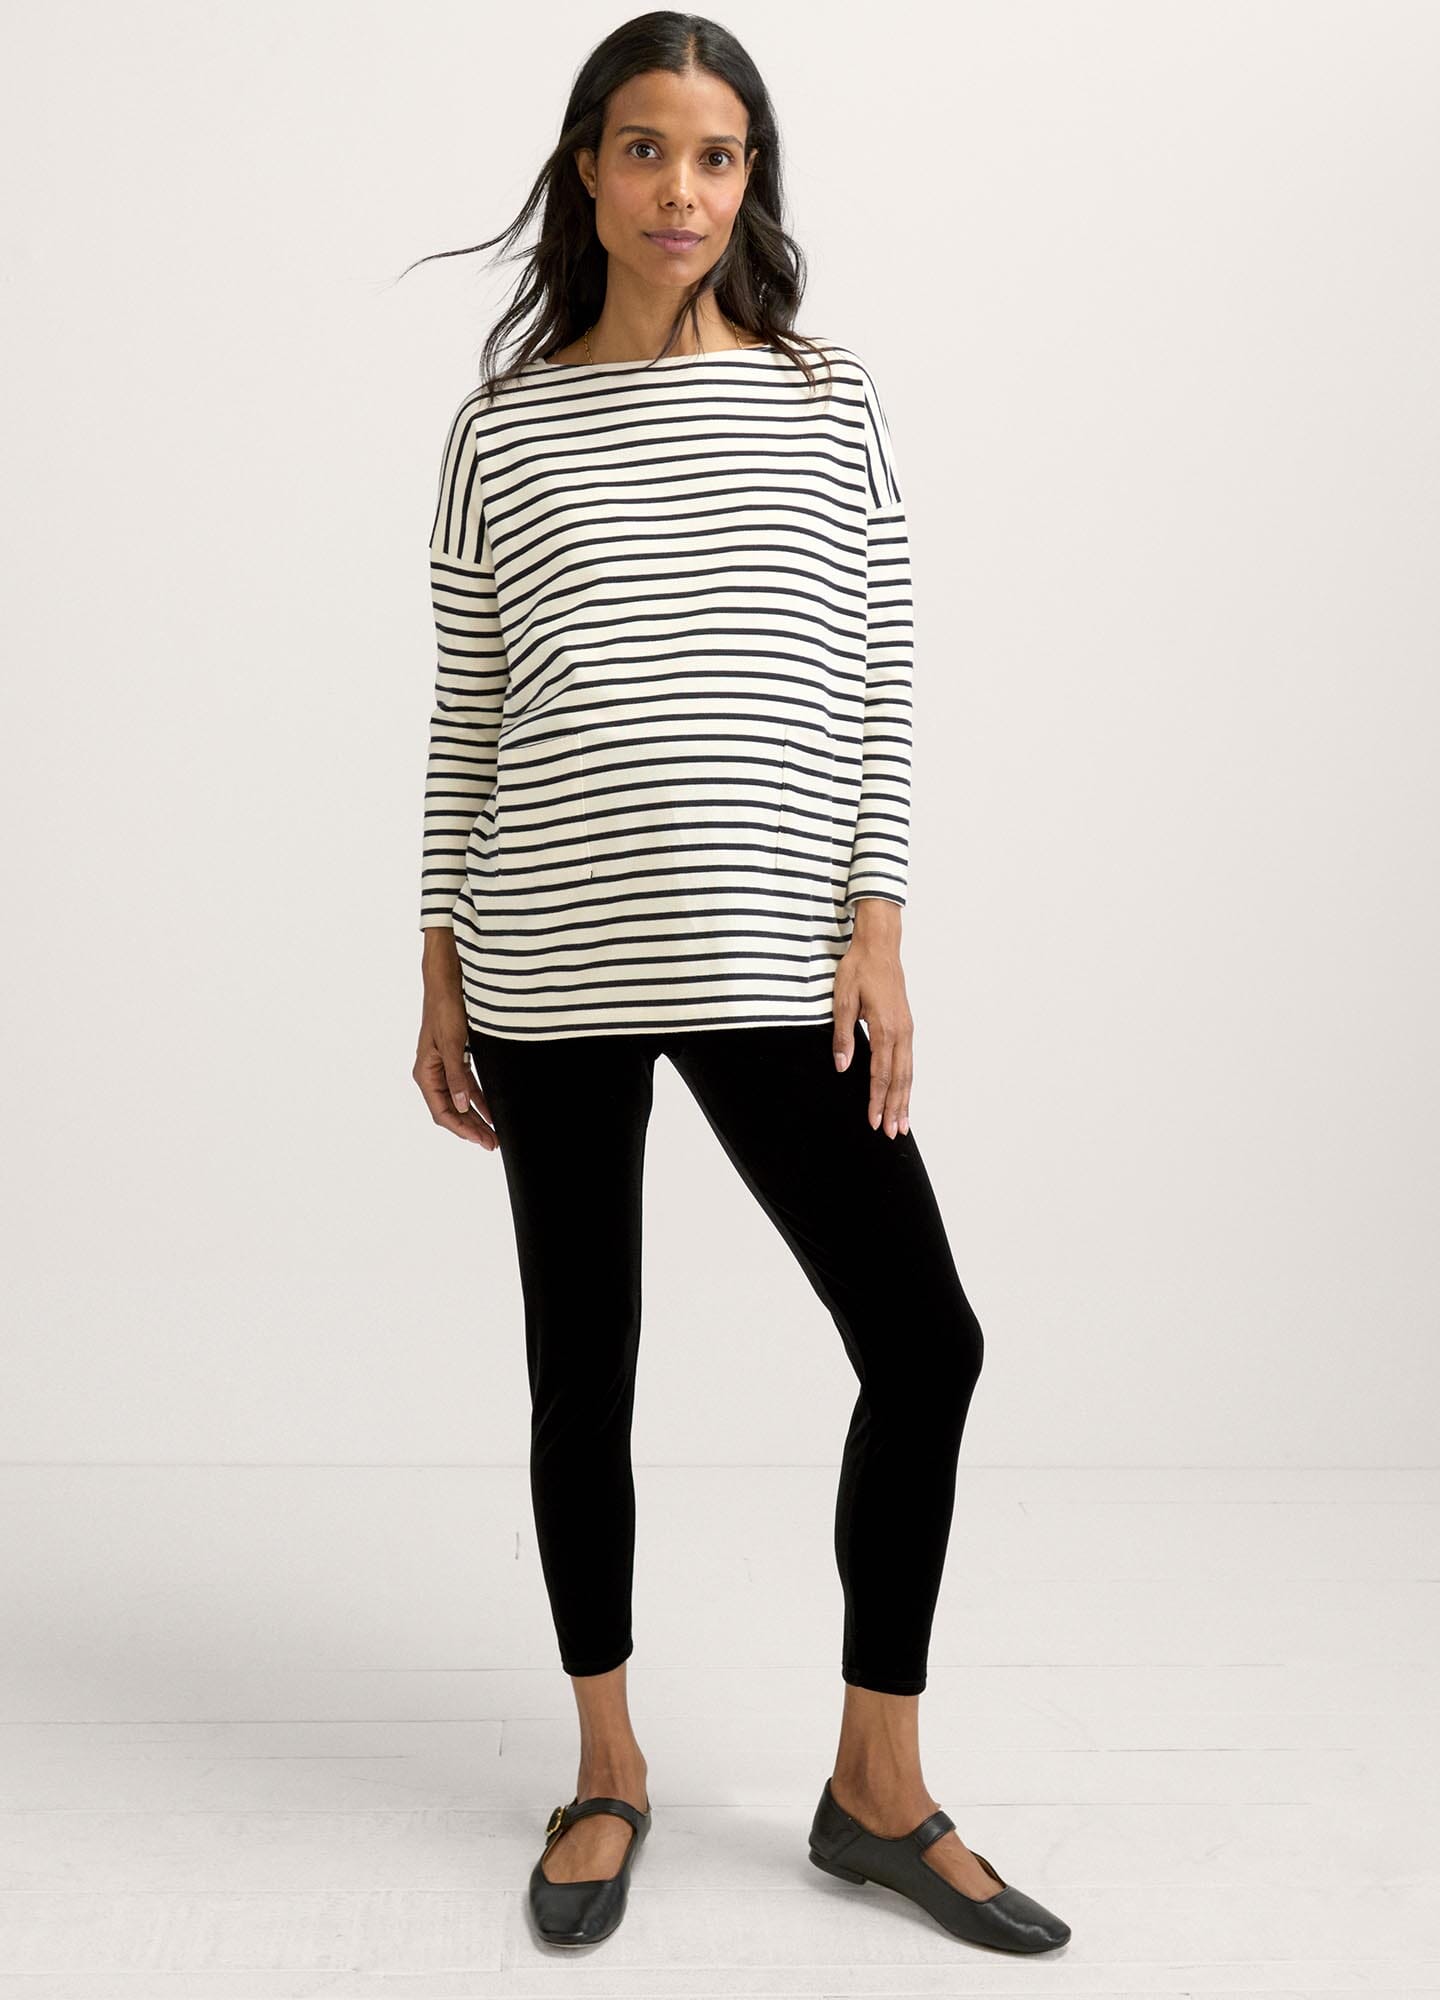 Bateau Top - Stylish Maternity Top| HATCH Collection